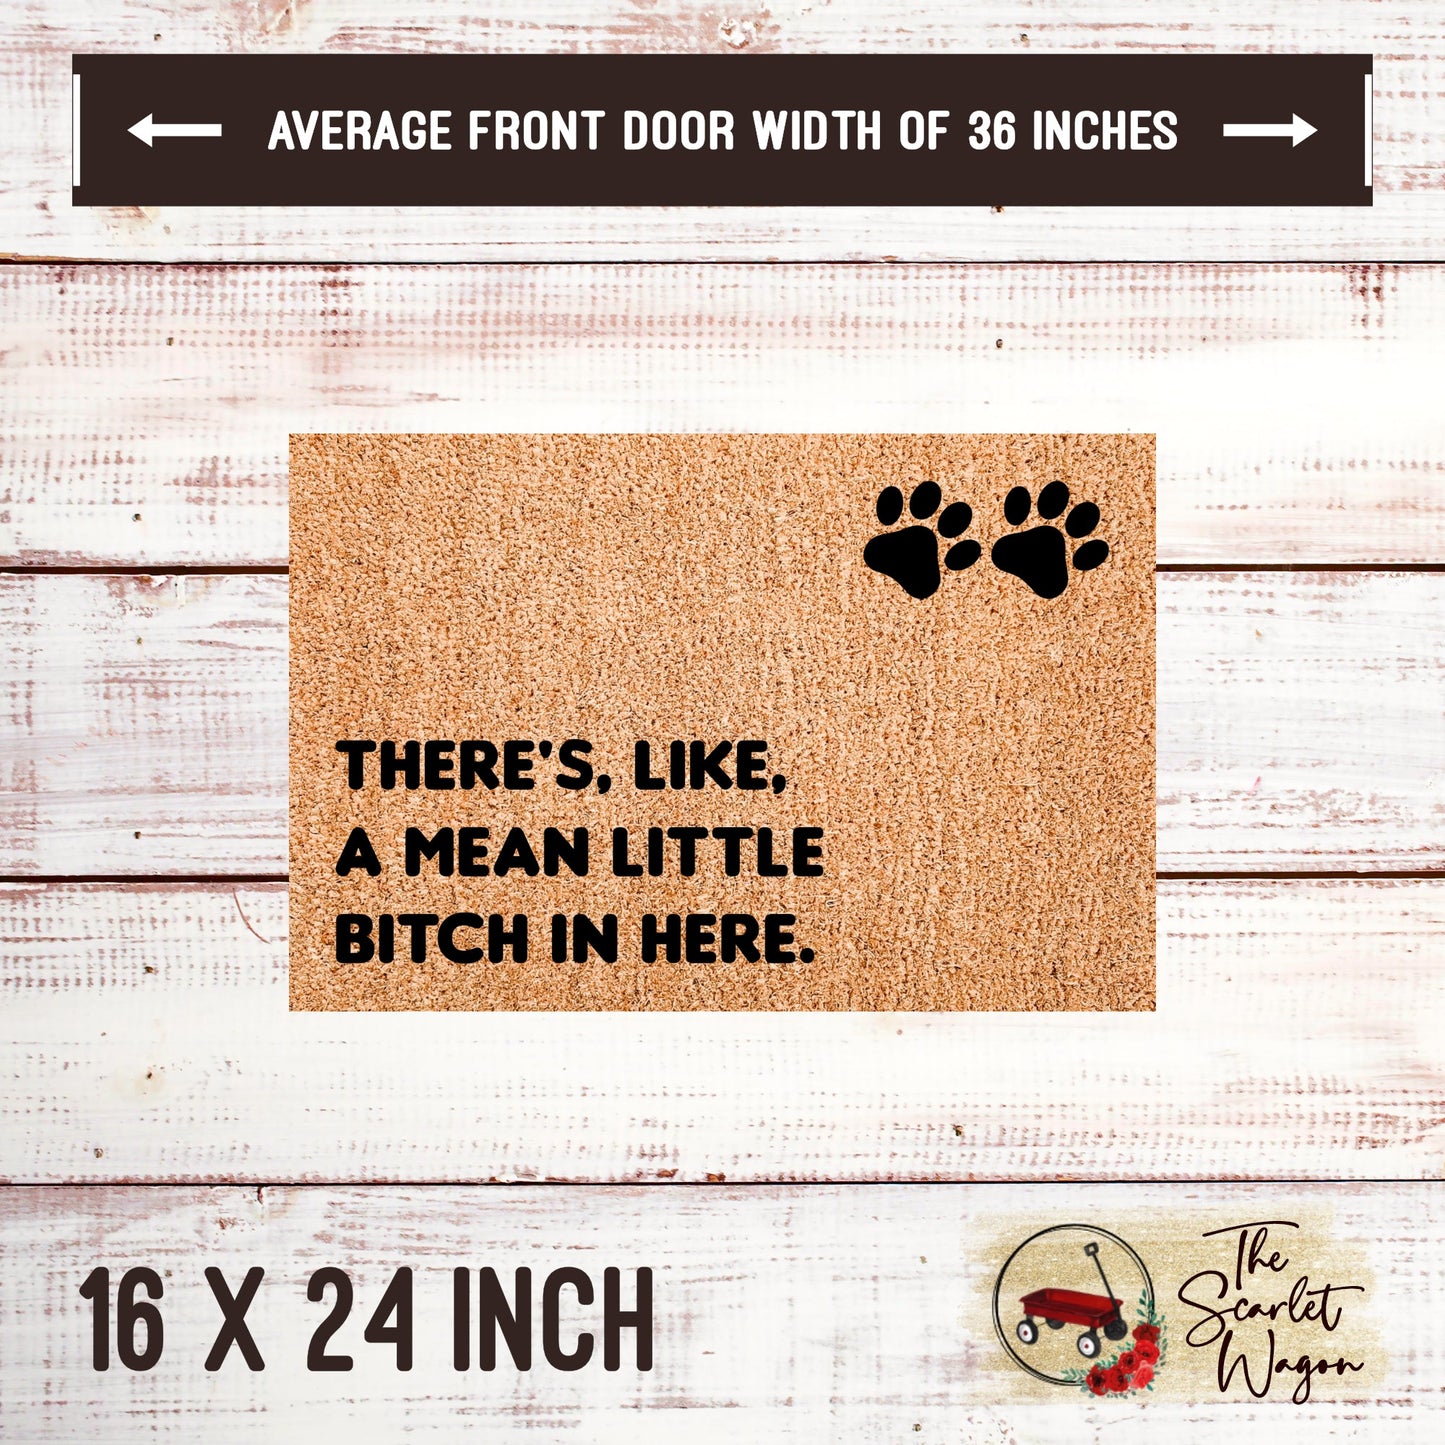 A Mean Little Bitch In Here Door Mats teelaunch 16x24 Inches 